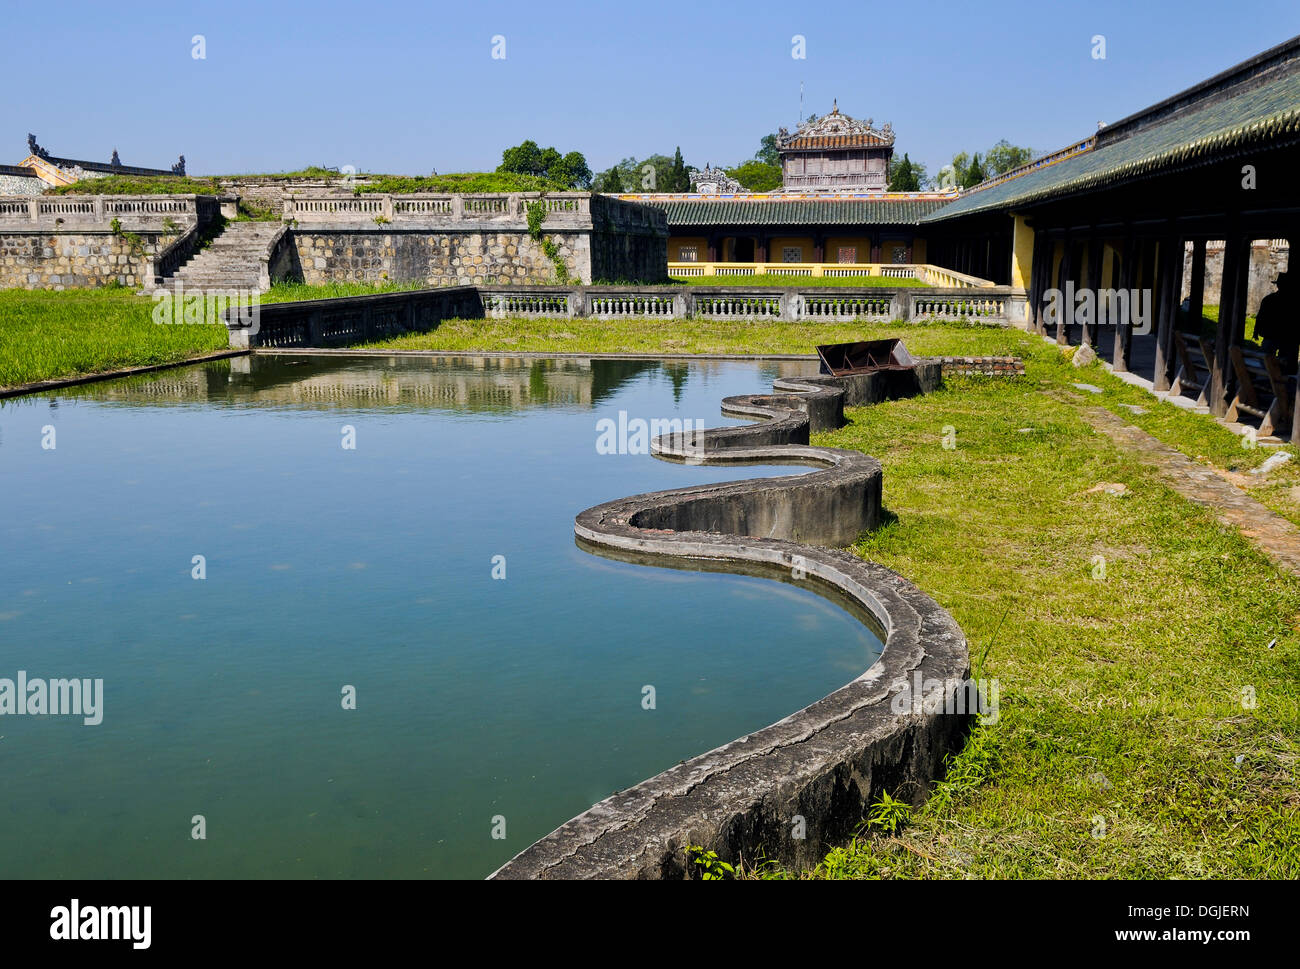 Pond in front of the treasury, Thai Hoa Palace Complex, Hoang Thanh Imperial Palace, Forbidden City, Hue Stock Photo